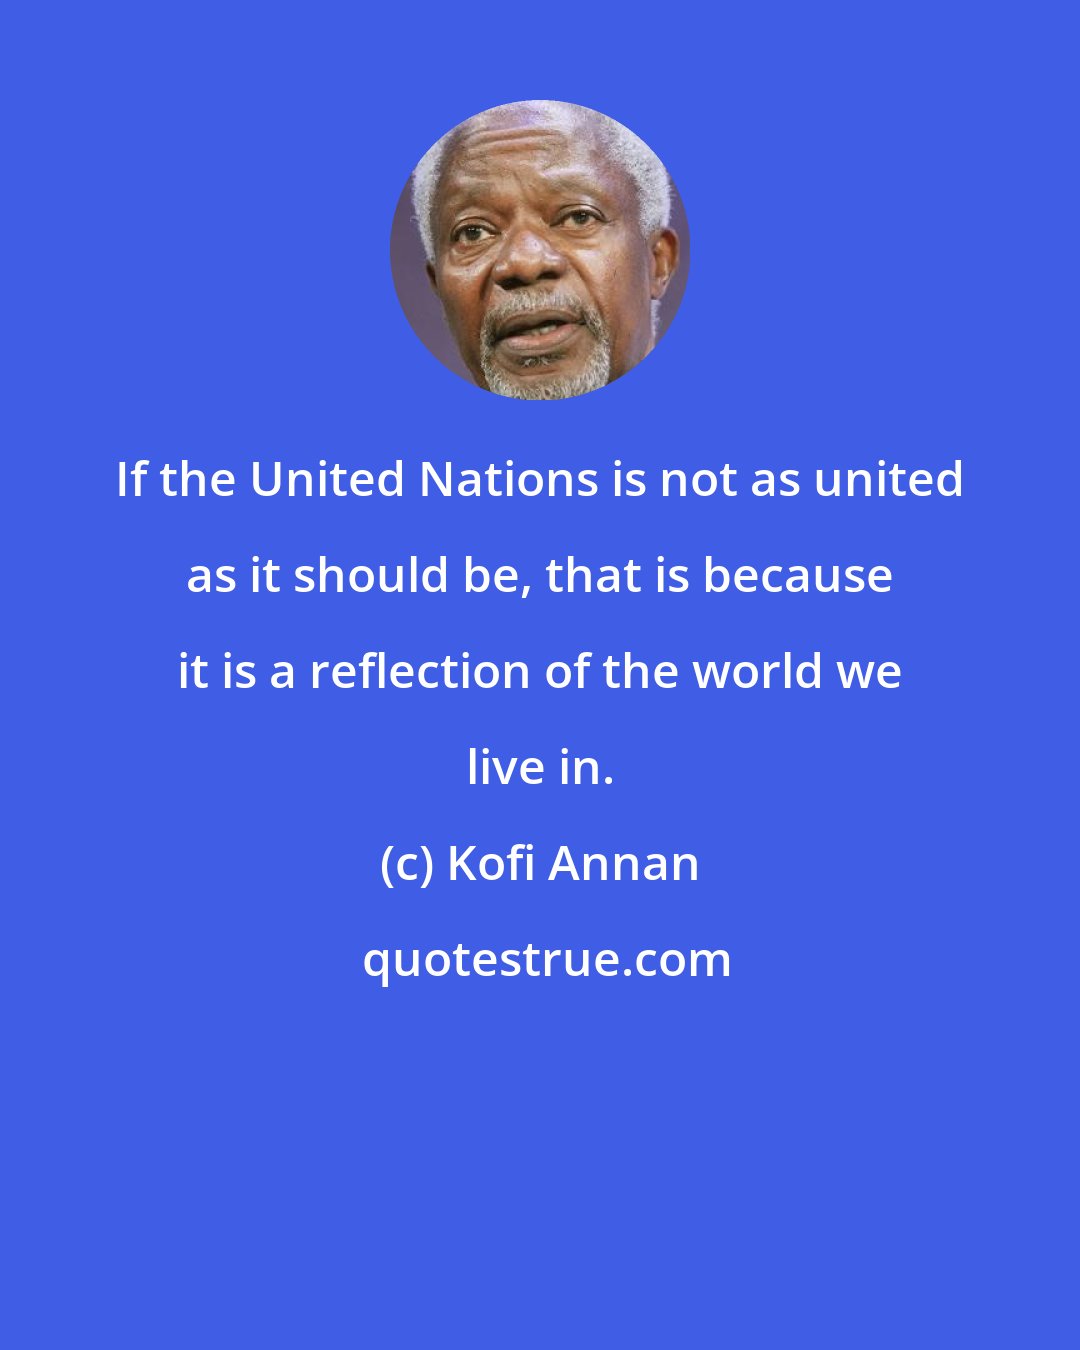 Kofi Annan: If the United Nations is not as united as it should be, that is because it is a reflection of the world we live in.